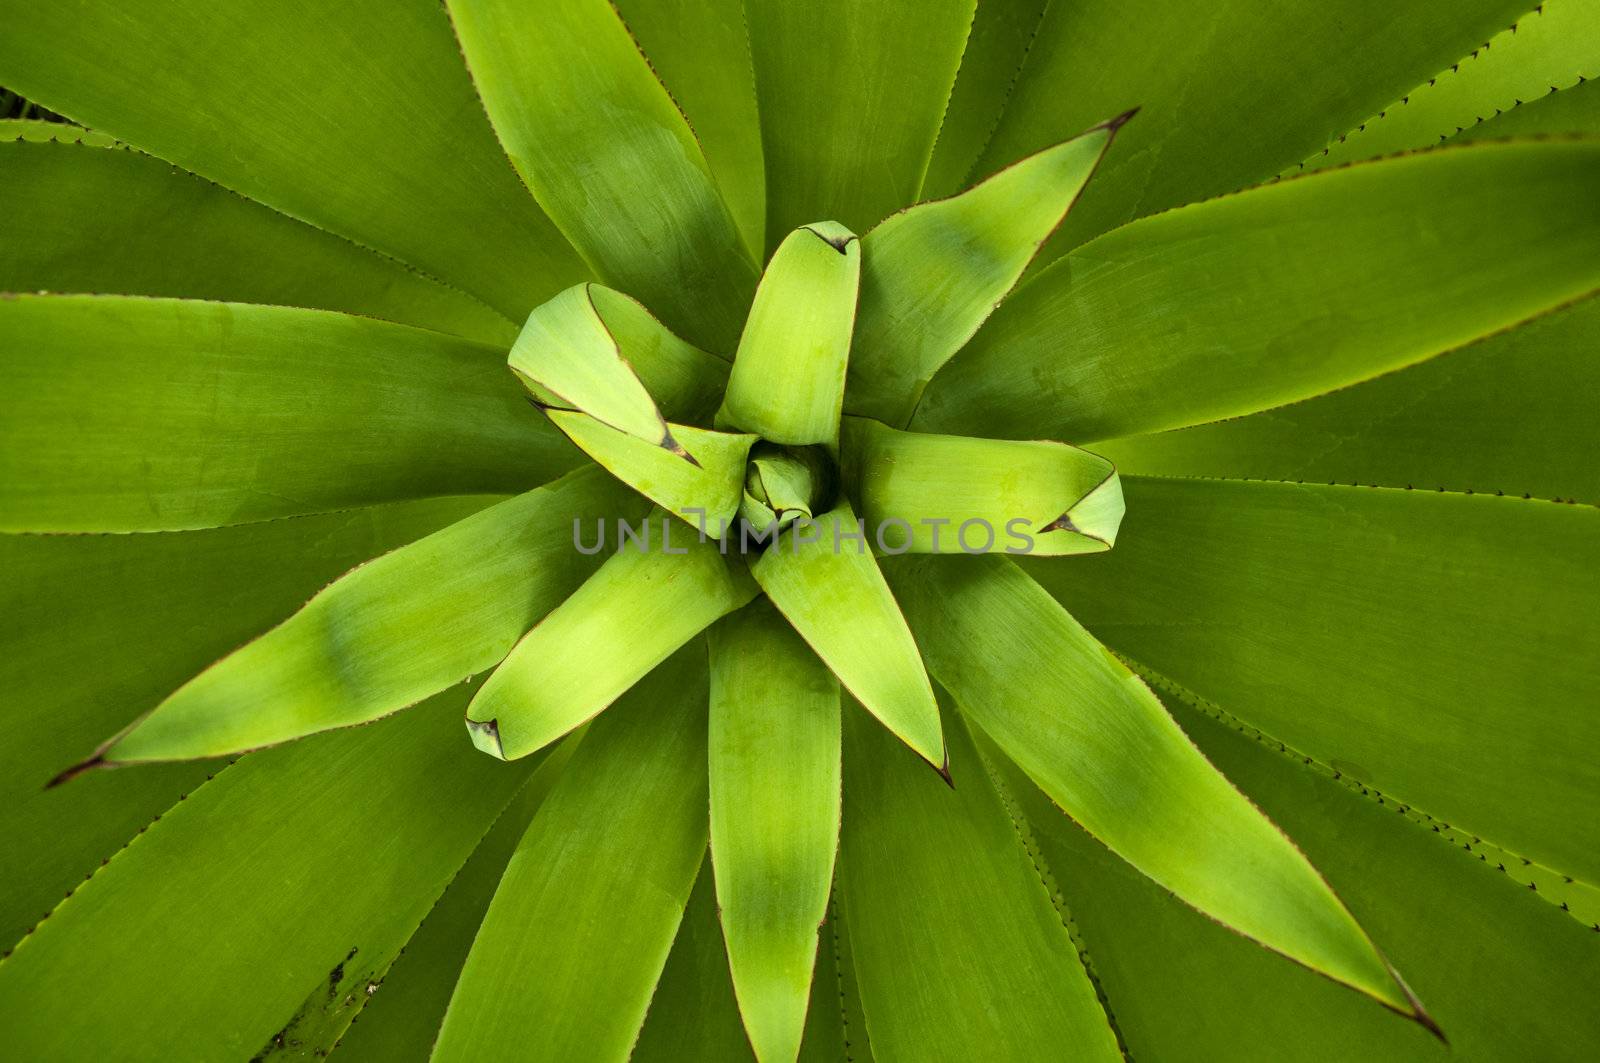 Close up picture of an Agave plant, overhead view